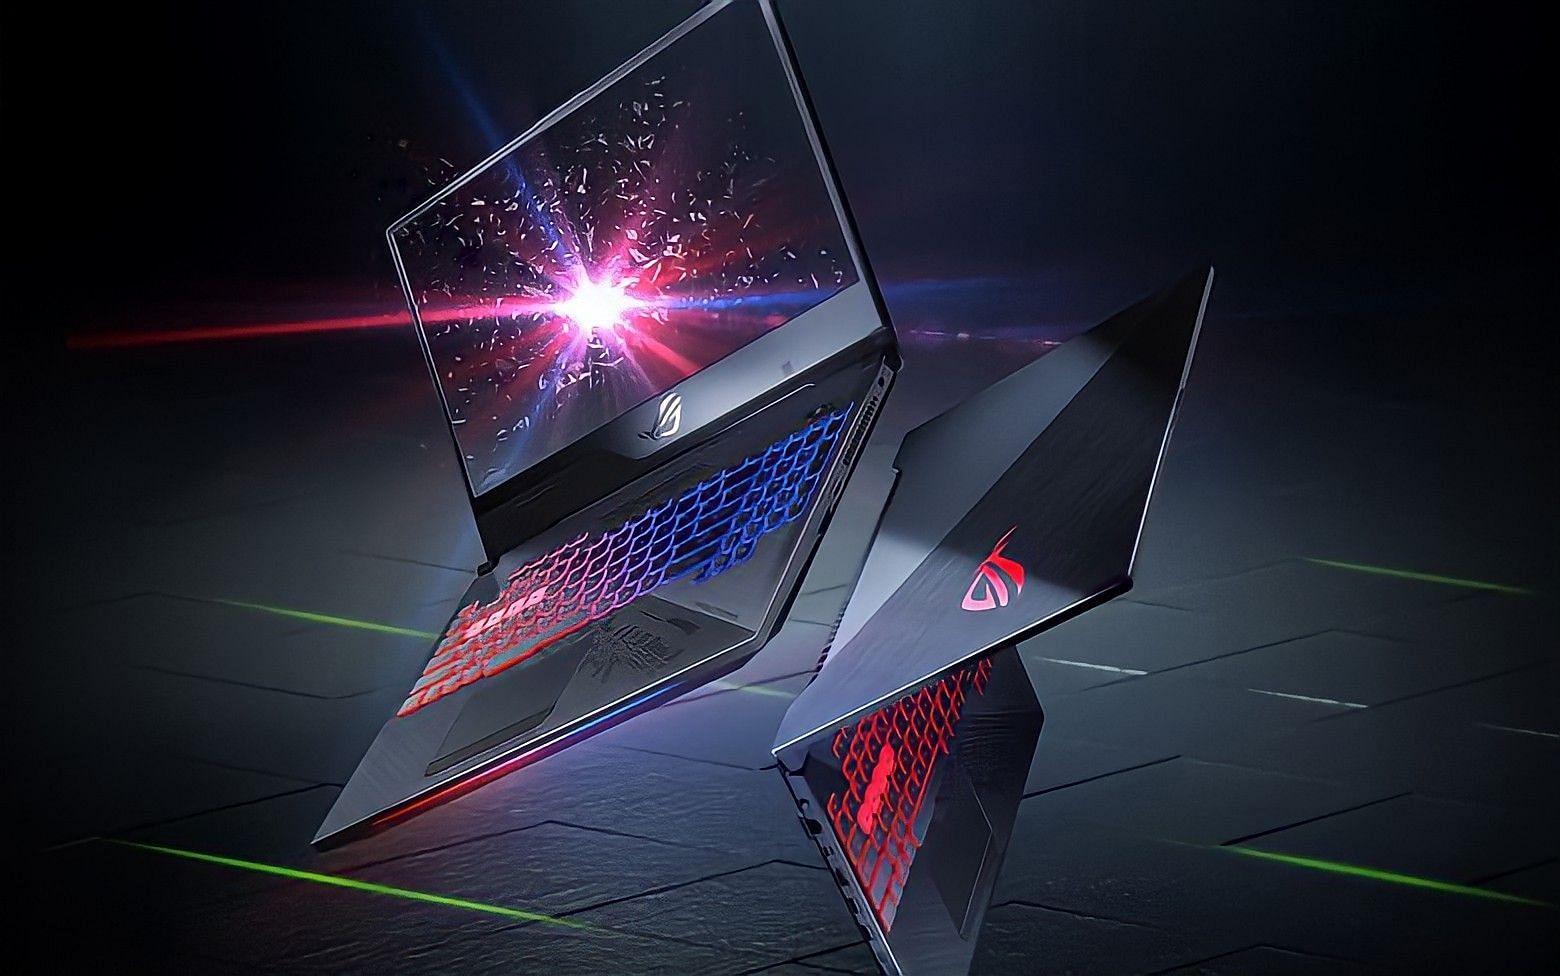 Asus remains atop the popularity ladder (Image via Asus)